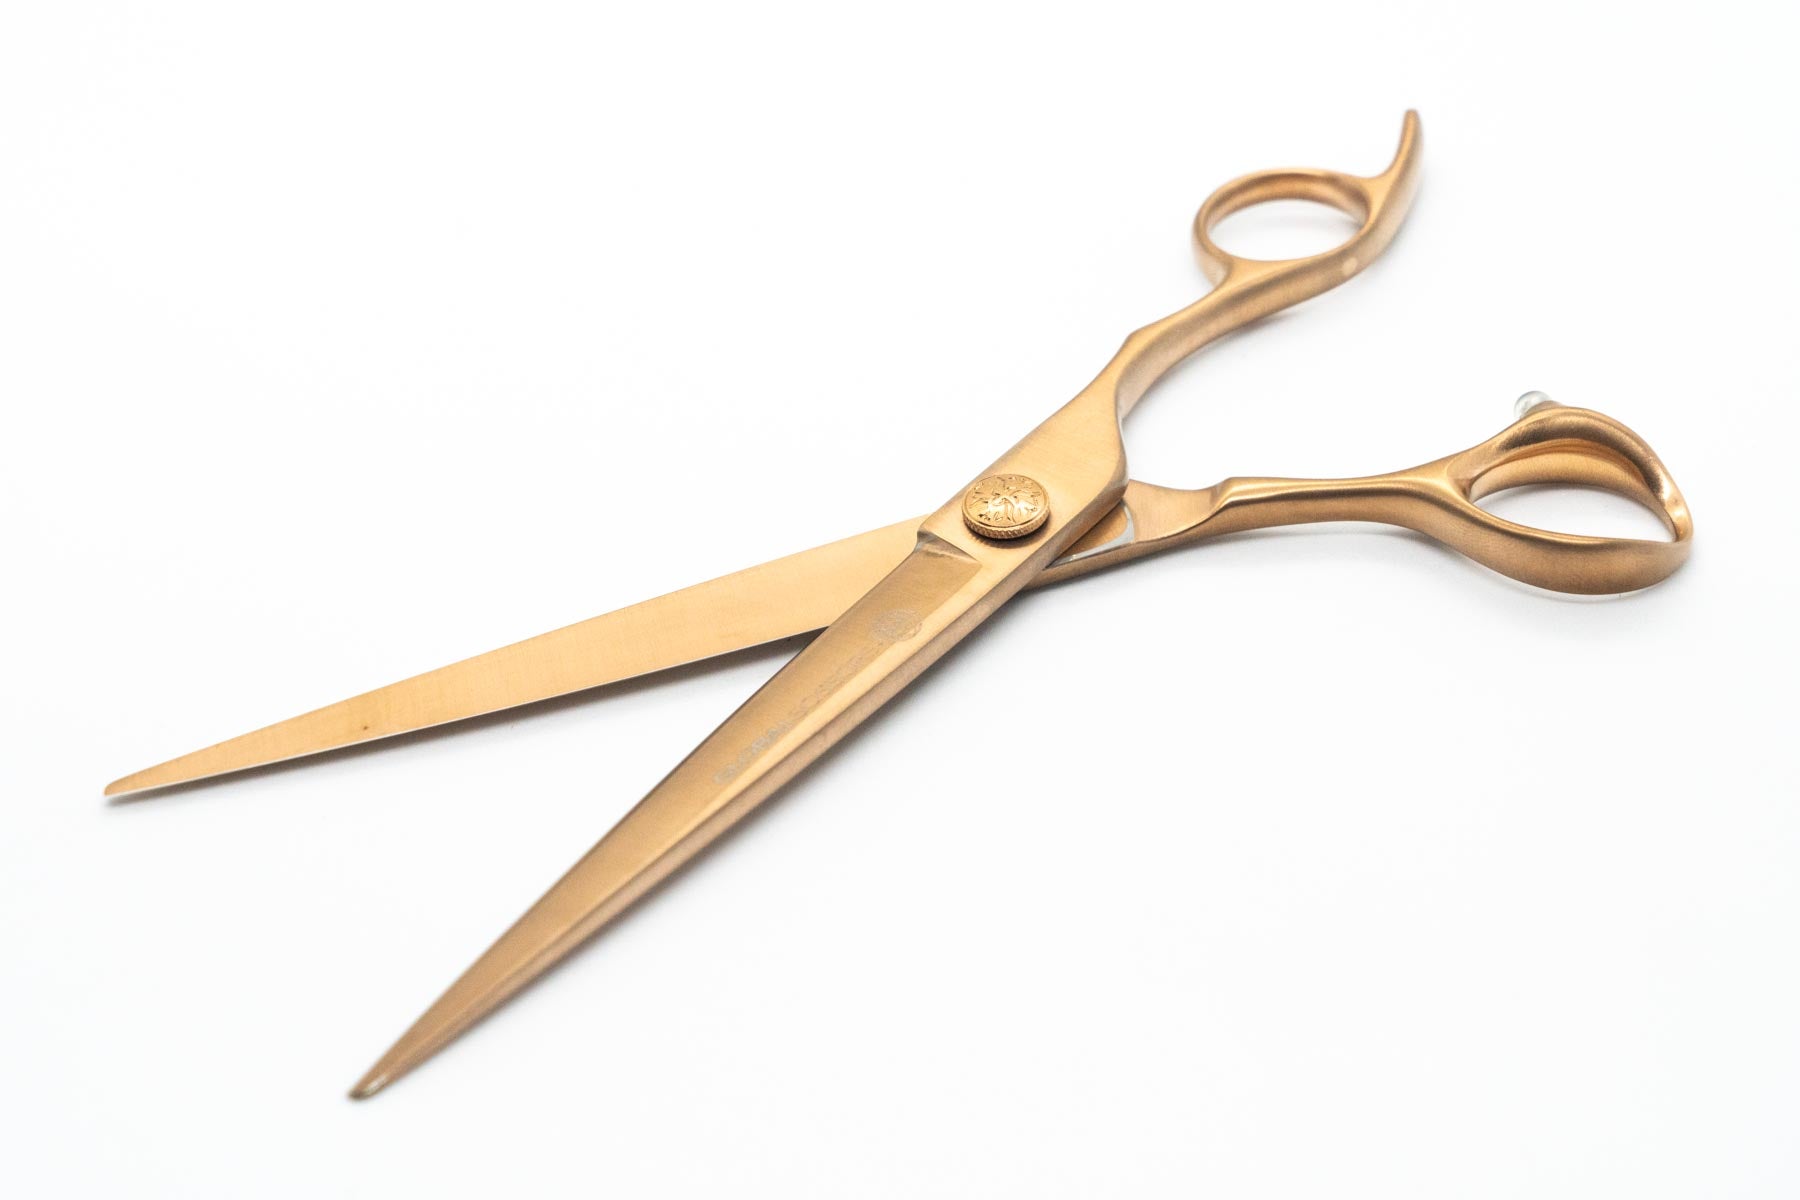 Aspen Light Rose Gold Pet Grooming 7.5 inch Cutting, Curved, Thinning & Chunker Scissor